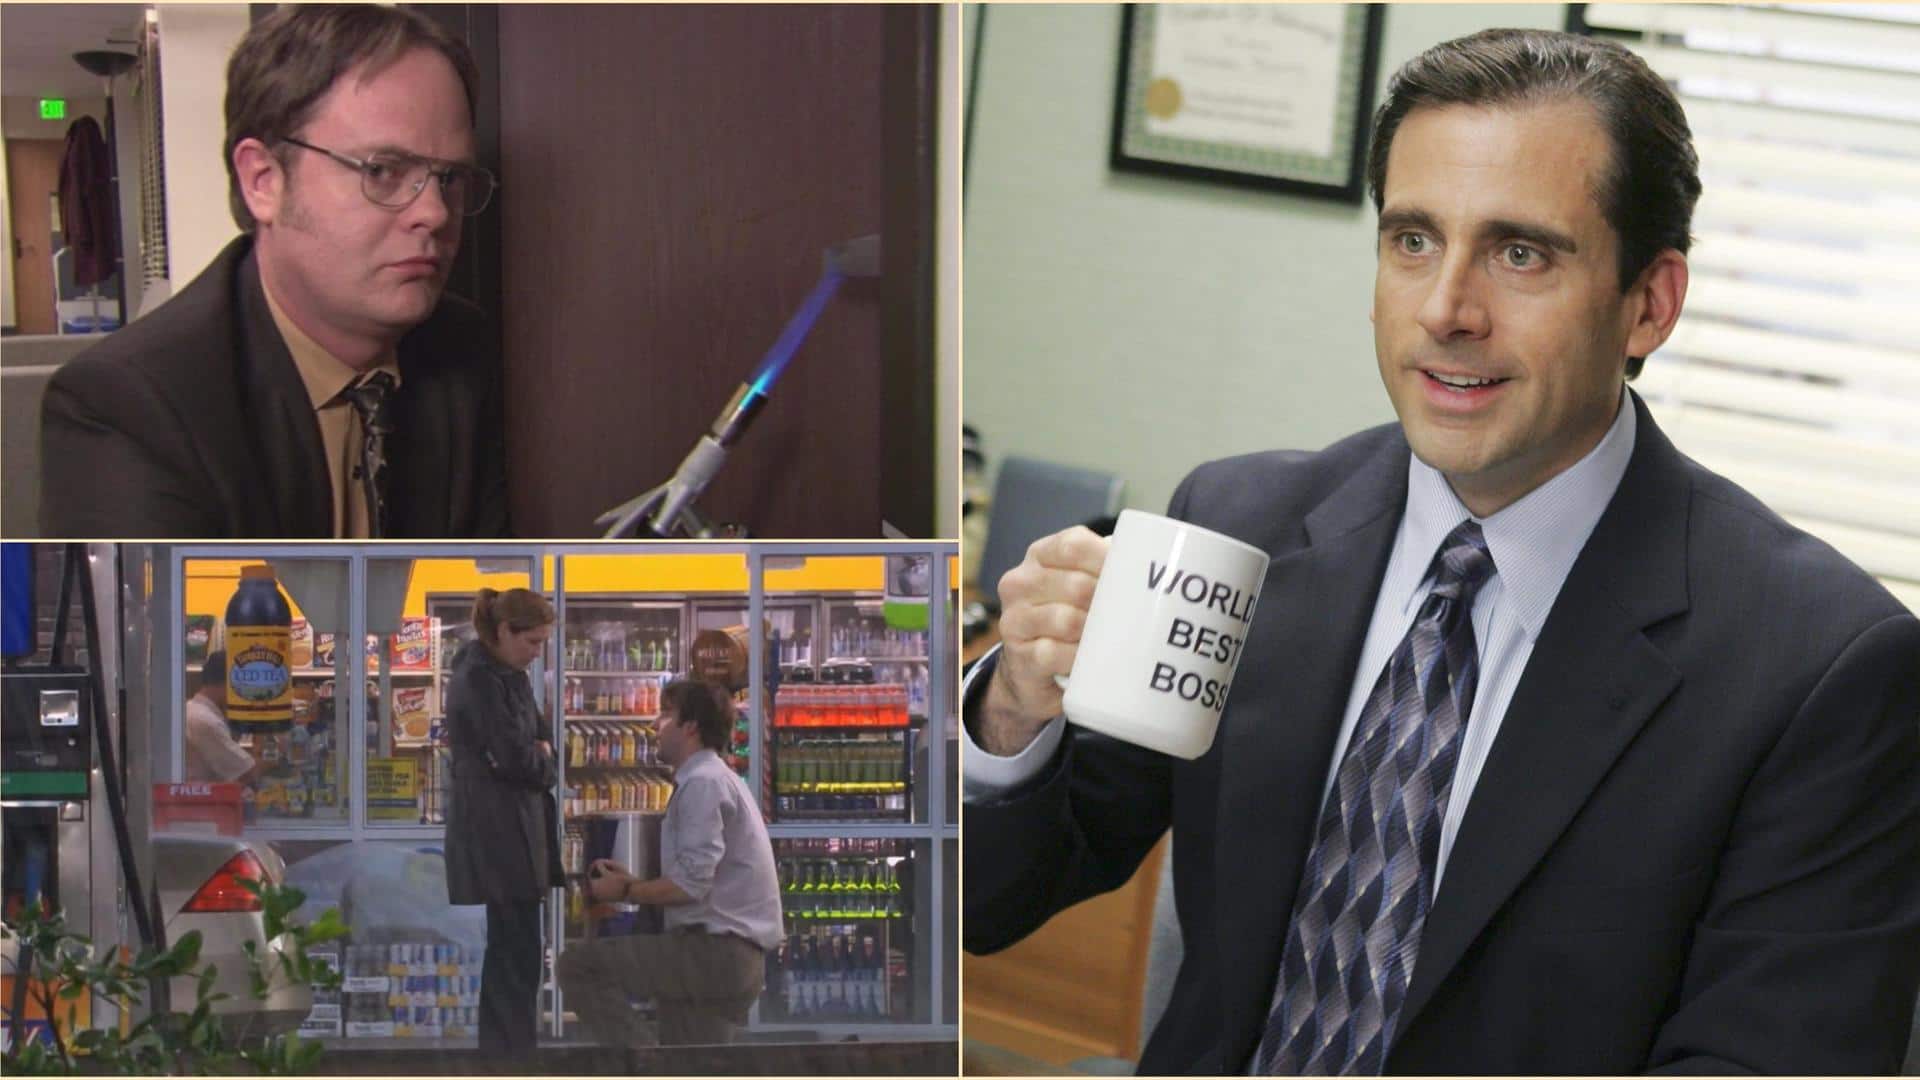 'The Office': 5 top scenes from hit US comedy series 